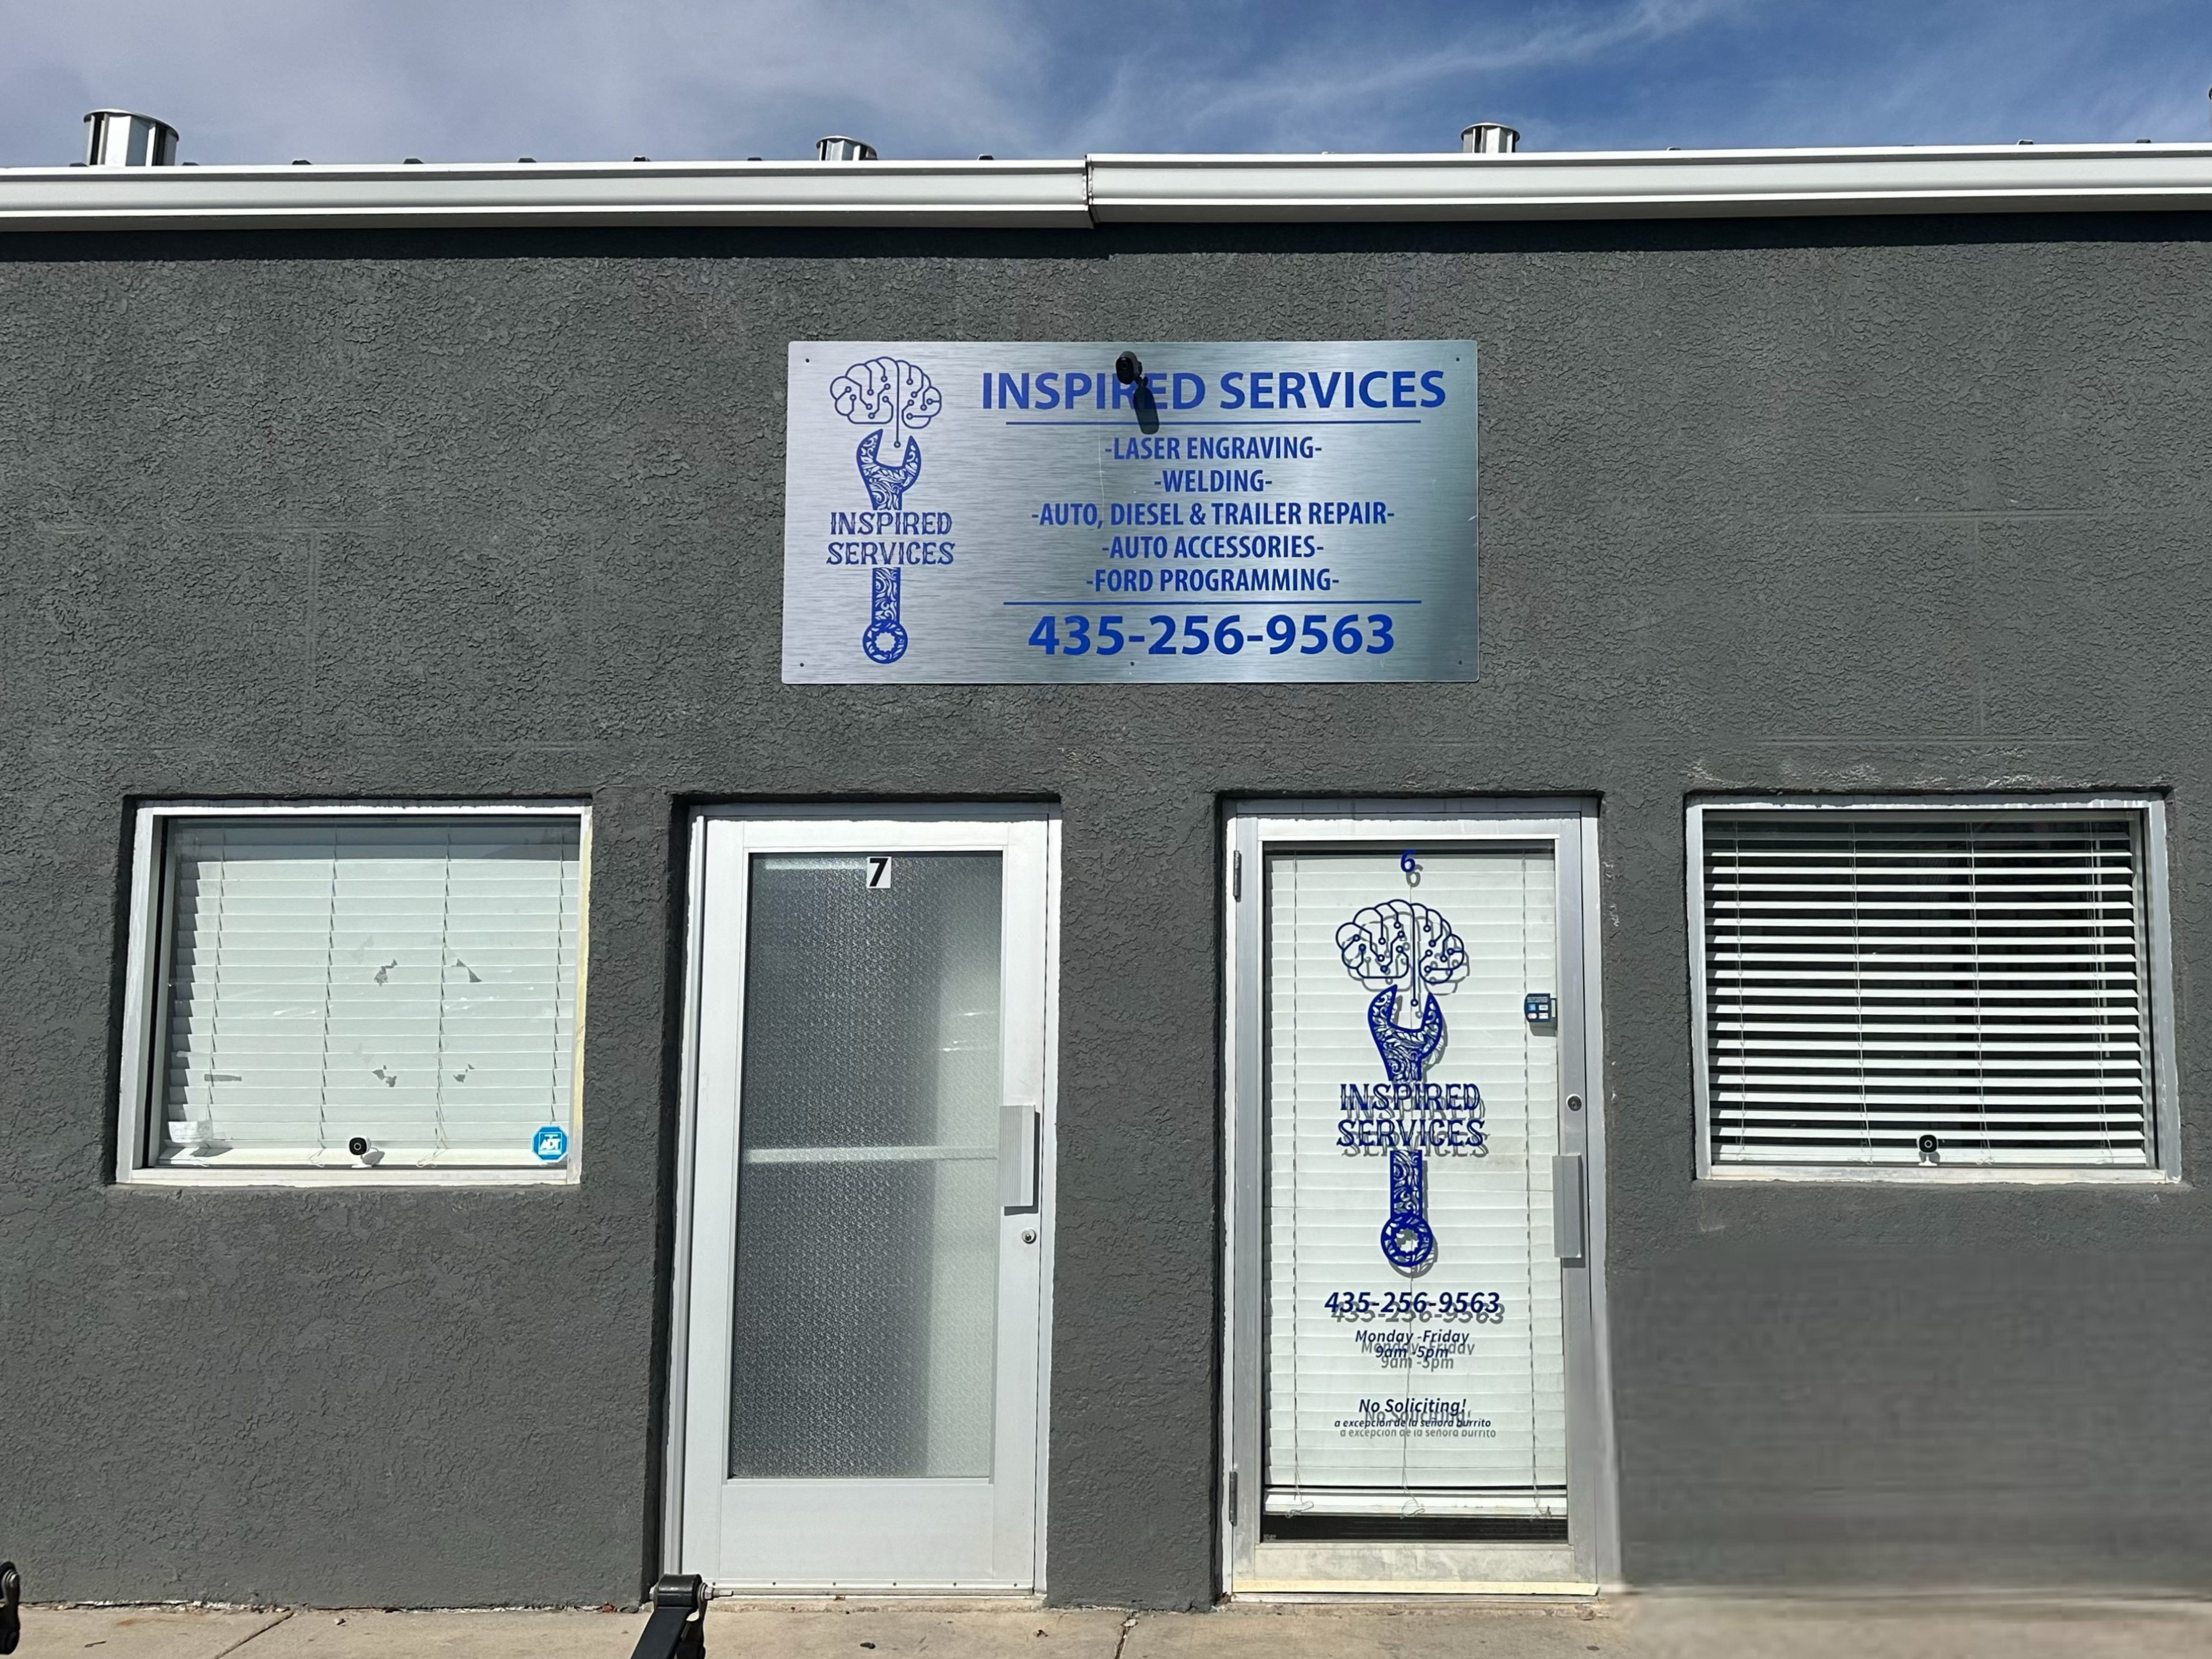 Inspired Services Store Front Metal Fabrications and Decorative Steel Signs